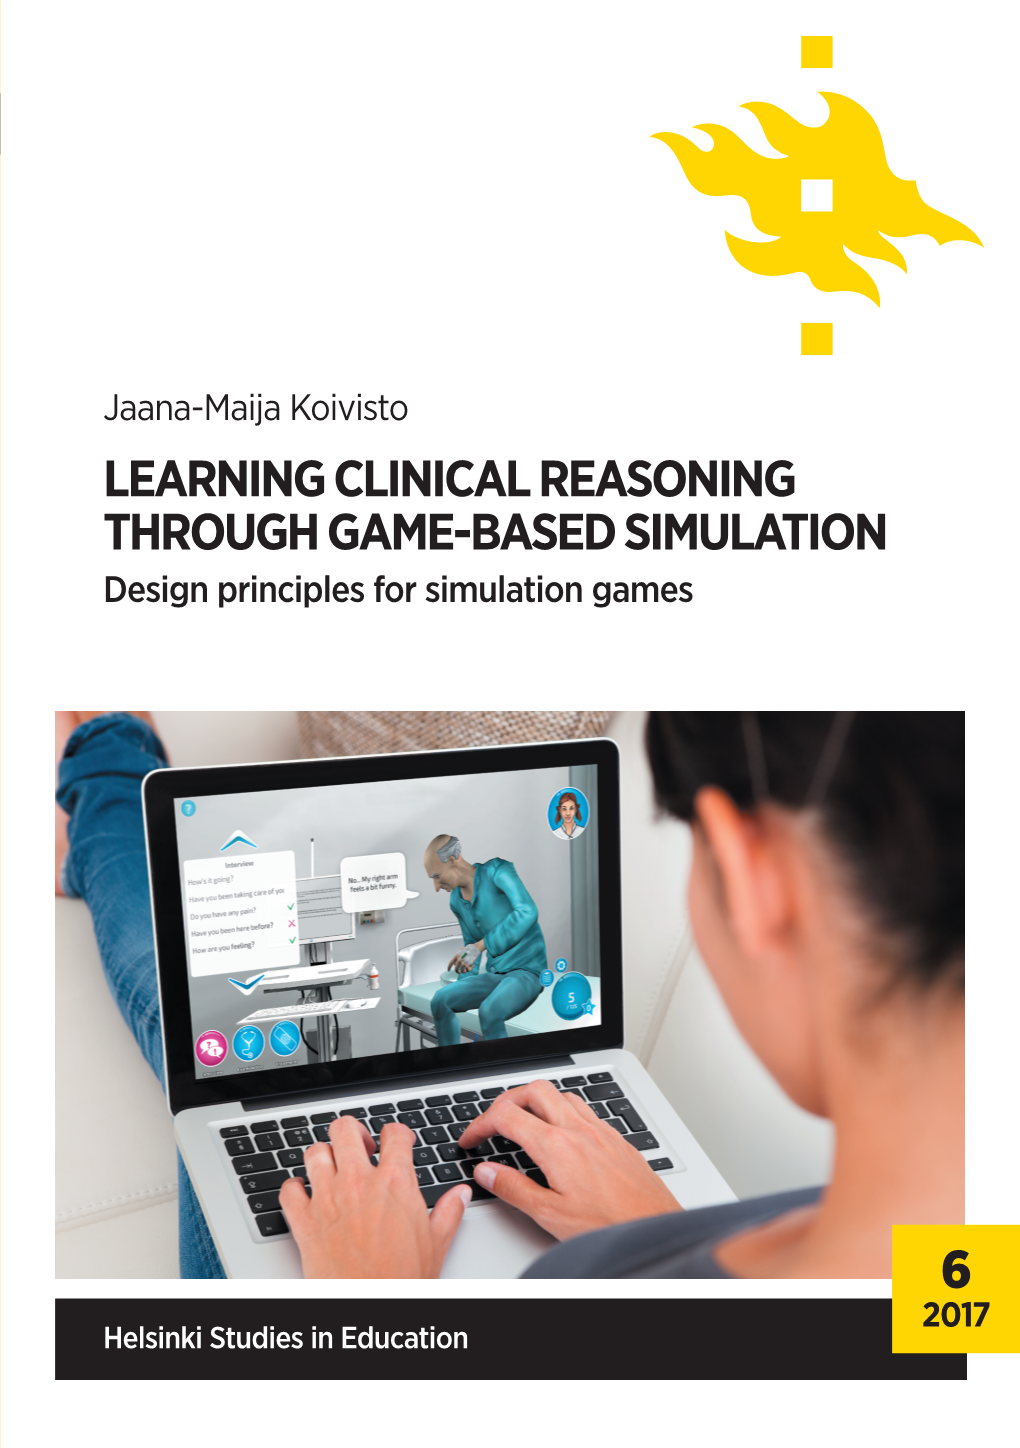 Learning Clinical Reasoning Through Game-Based Simulation